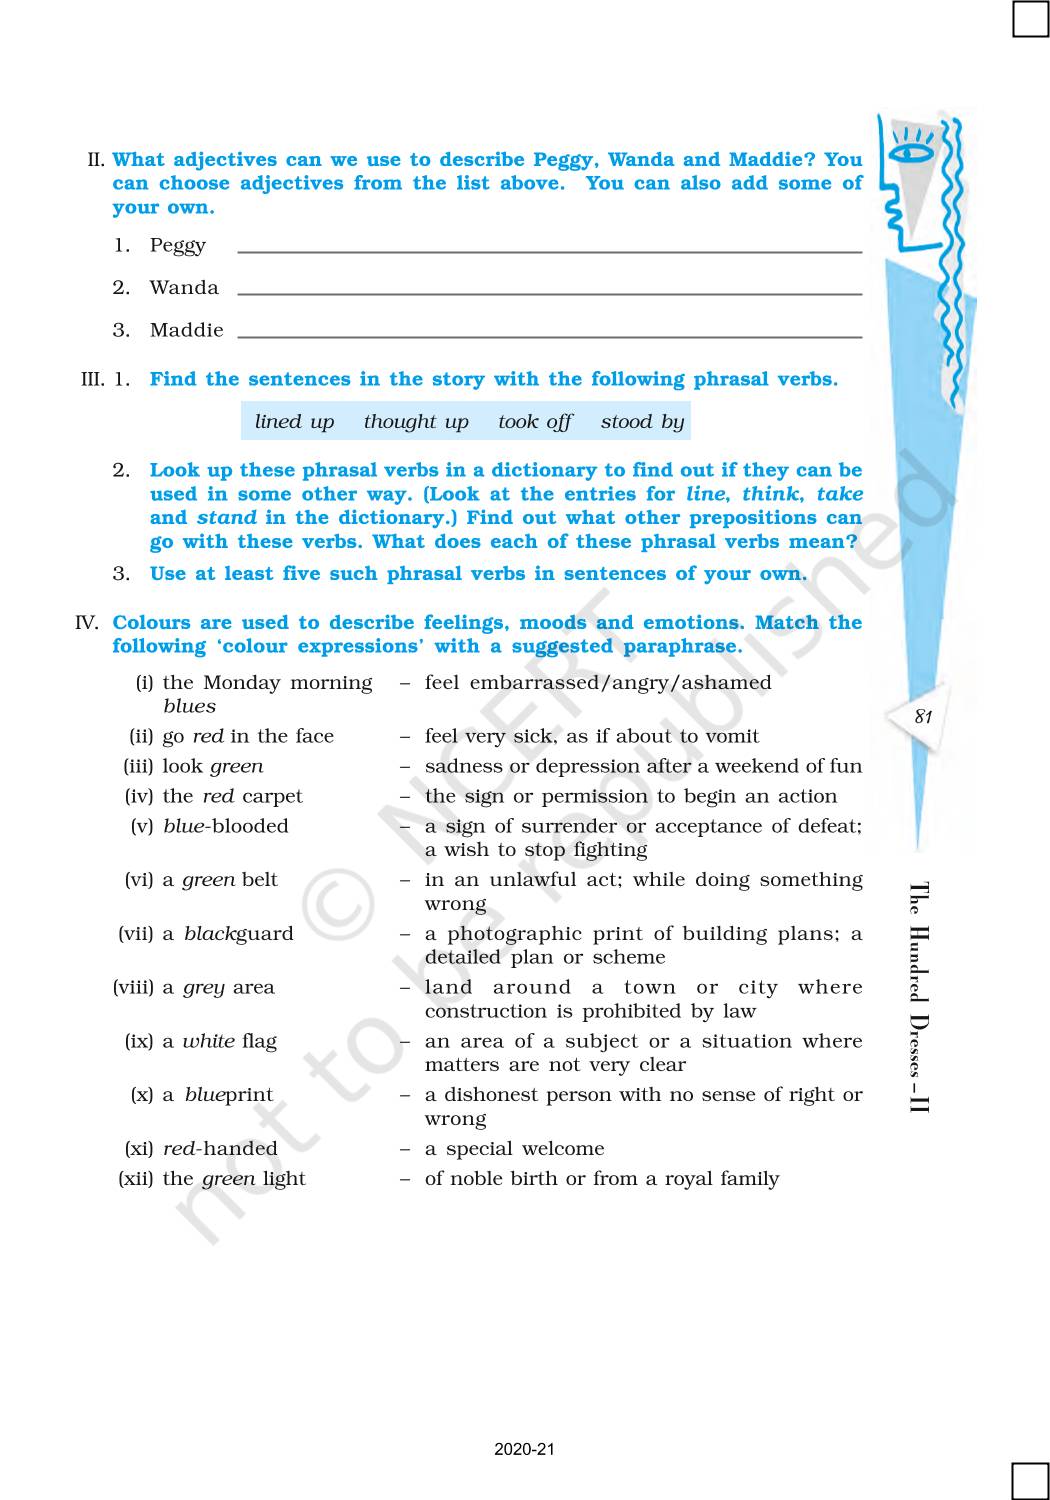 NCERT solutions for Class 10 English (First Flight) chapter 6.1 - The  Hundred Dresses–II [Latest edition] | Shaalaa.com